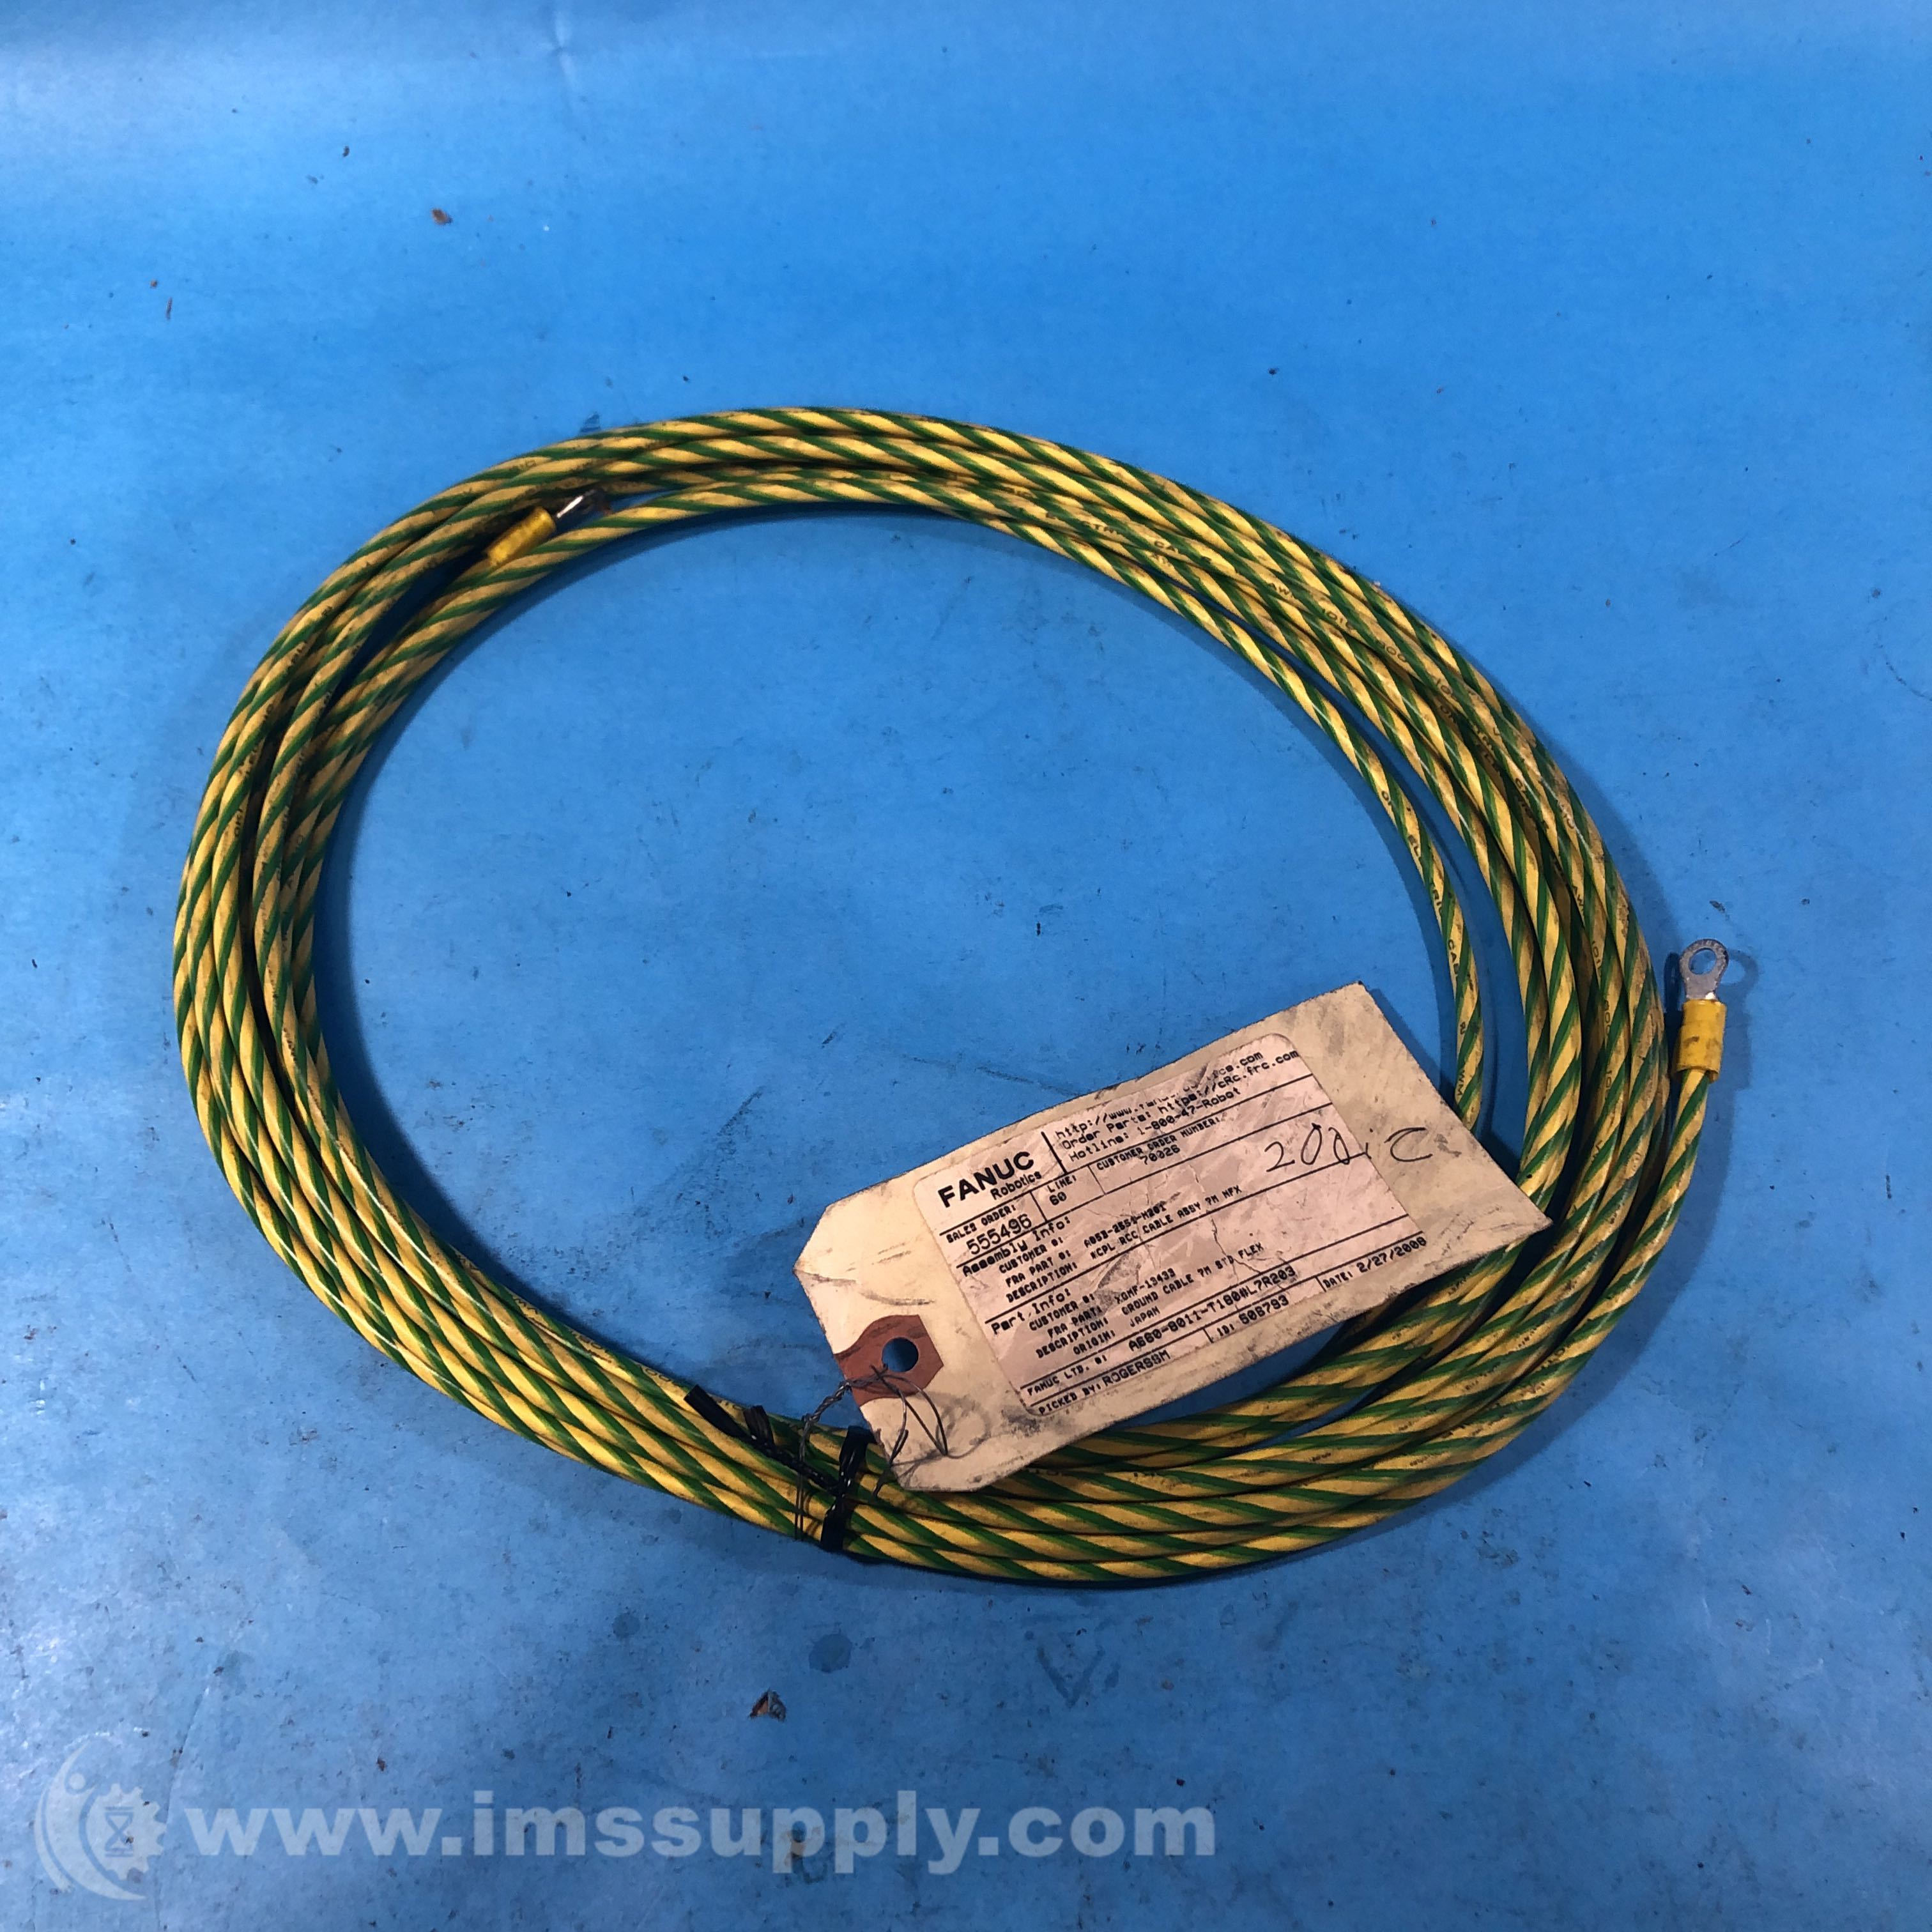 Fanuc A660-8011-T180#L7R203 Ground Cable Assembly, 7M - IMS Supply